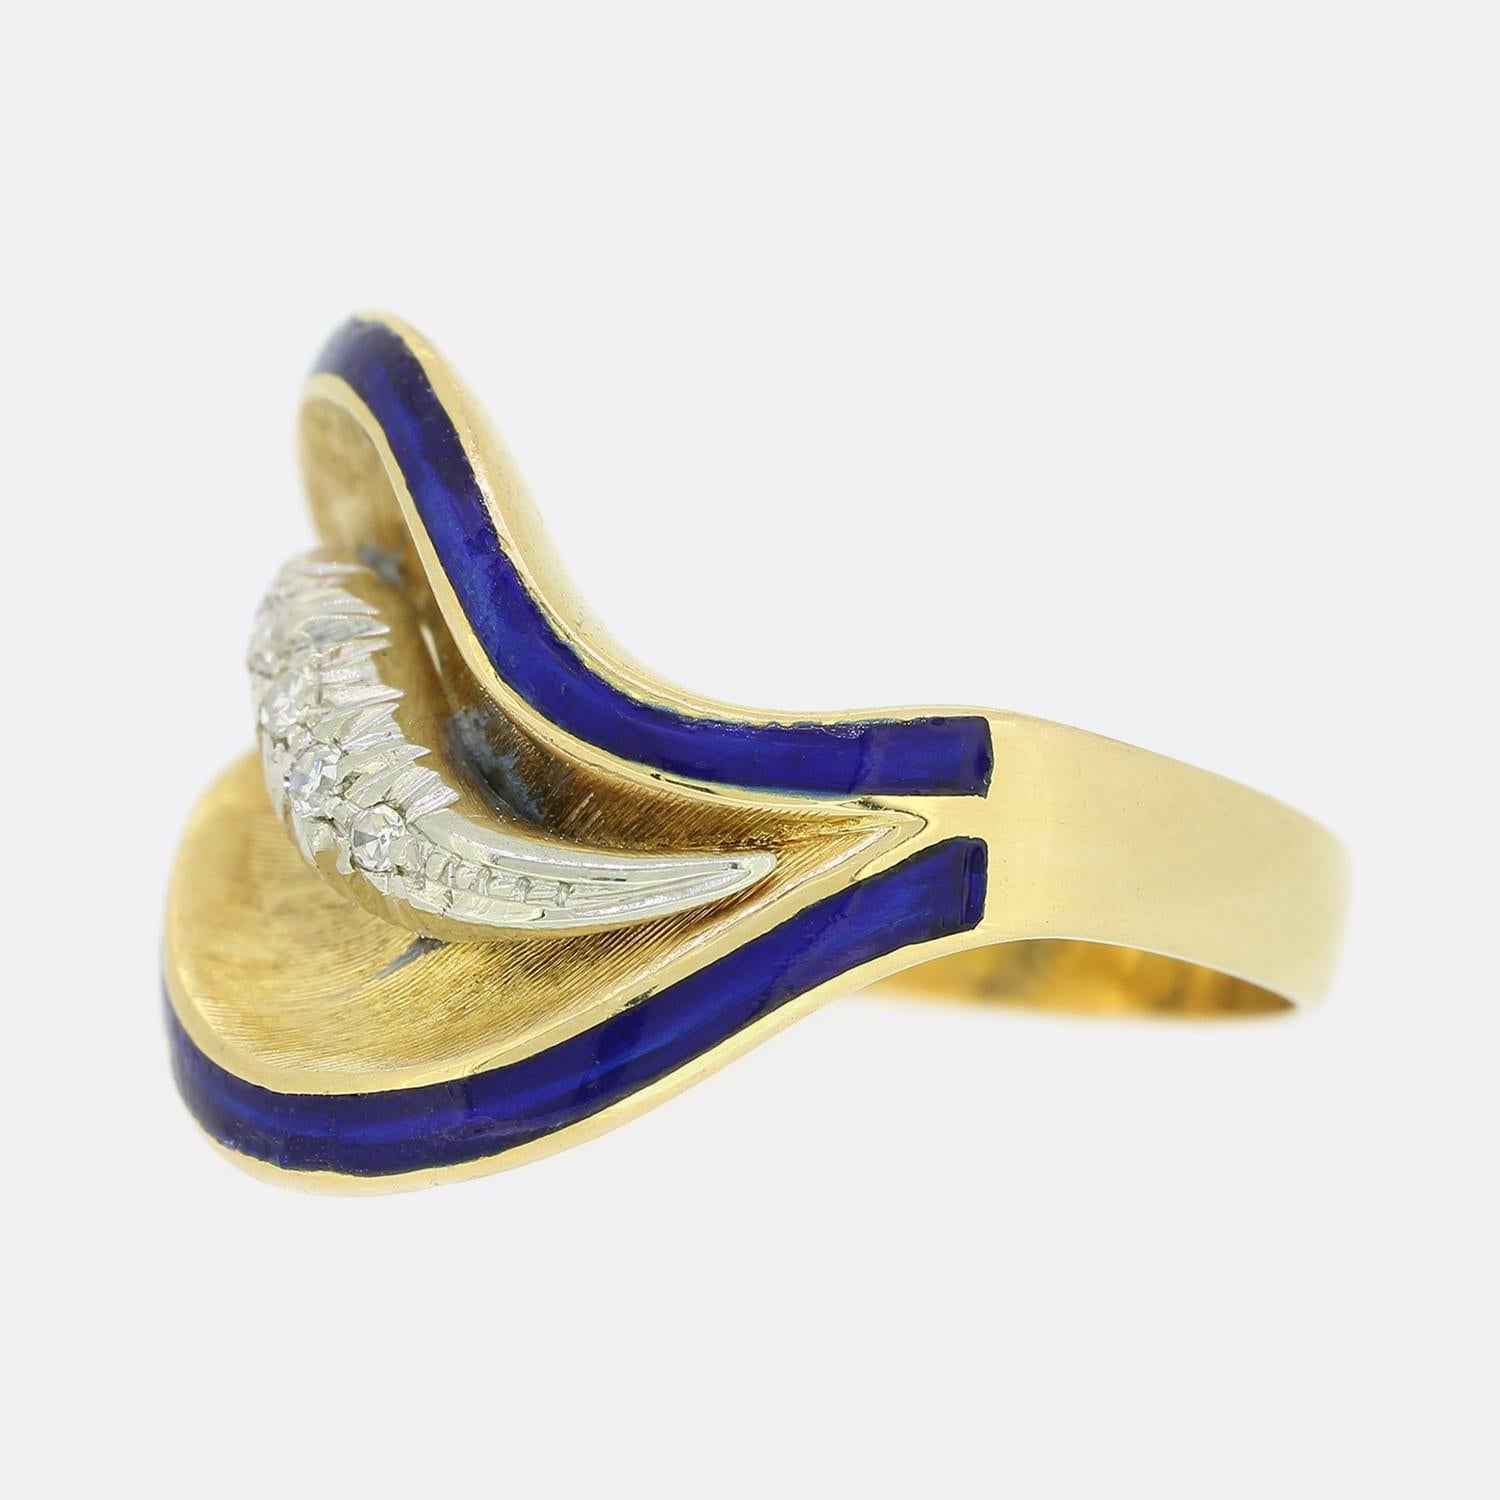 This is a vintage 18ct yellow gold diamond ring. The ring is in a swirl style and inside 2 blue enamel layers there is 5 'eight' cut diamonds, set in white gold to enhance their sparkle.

Condition: Used (Very Good)
Weight: 7.4grams
Ring Size: